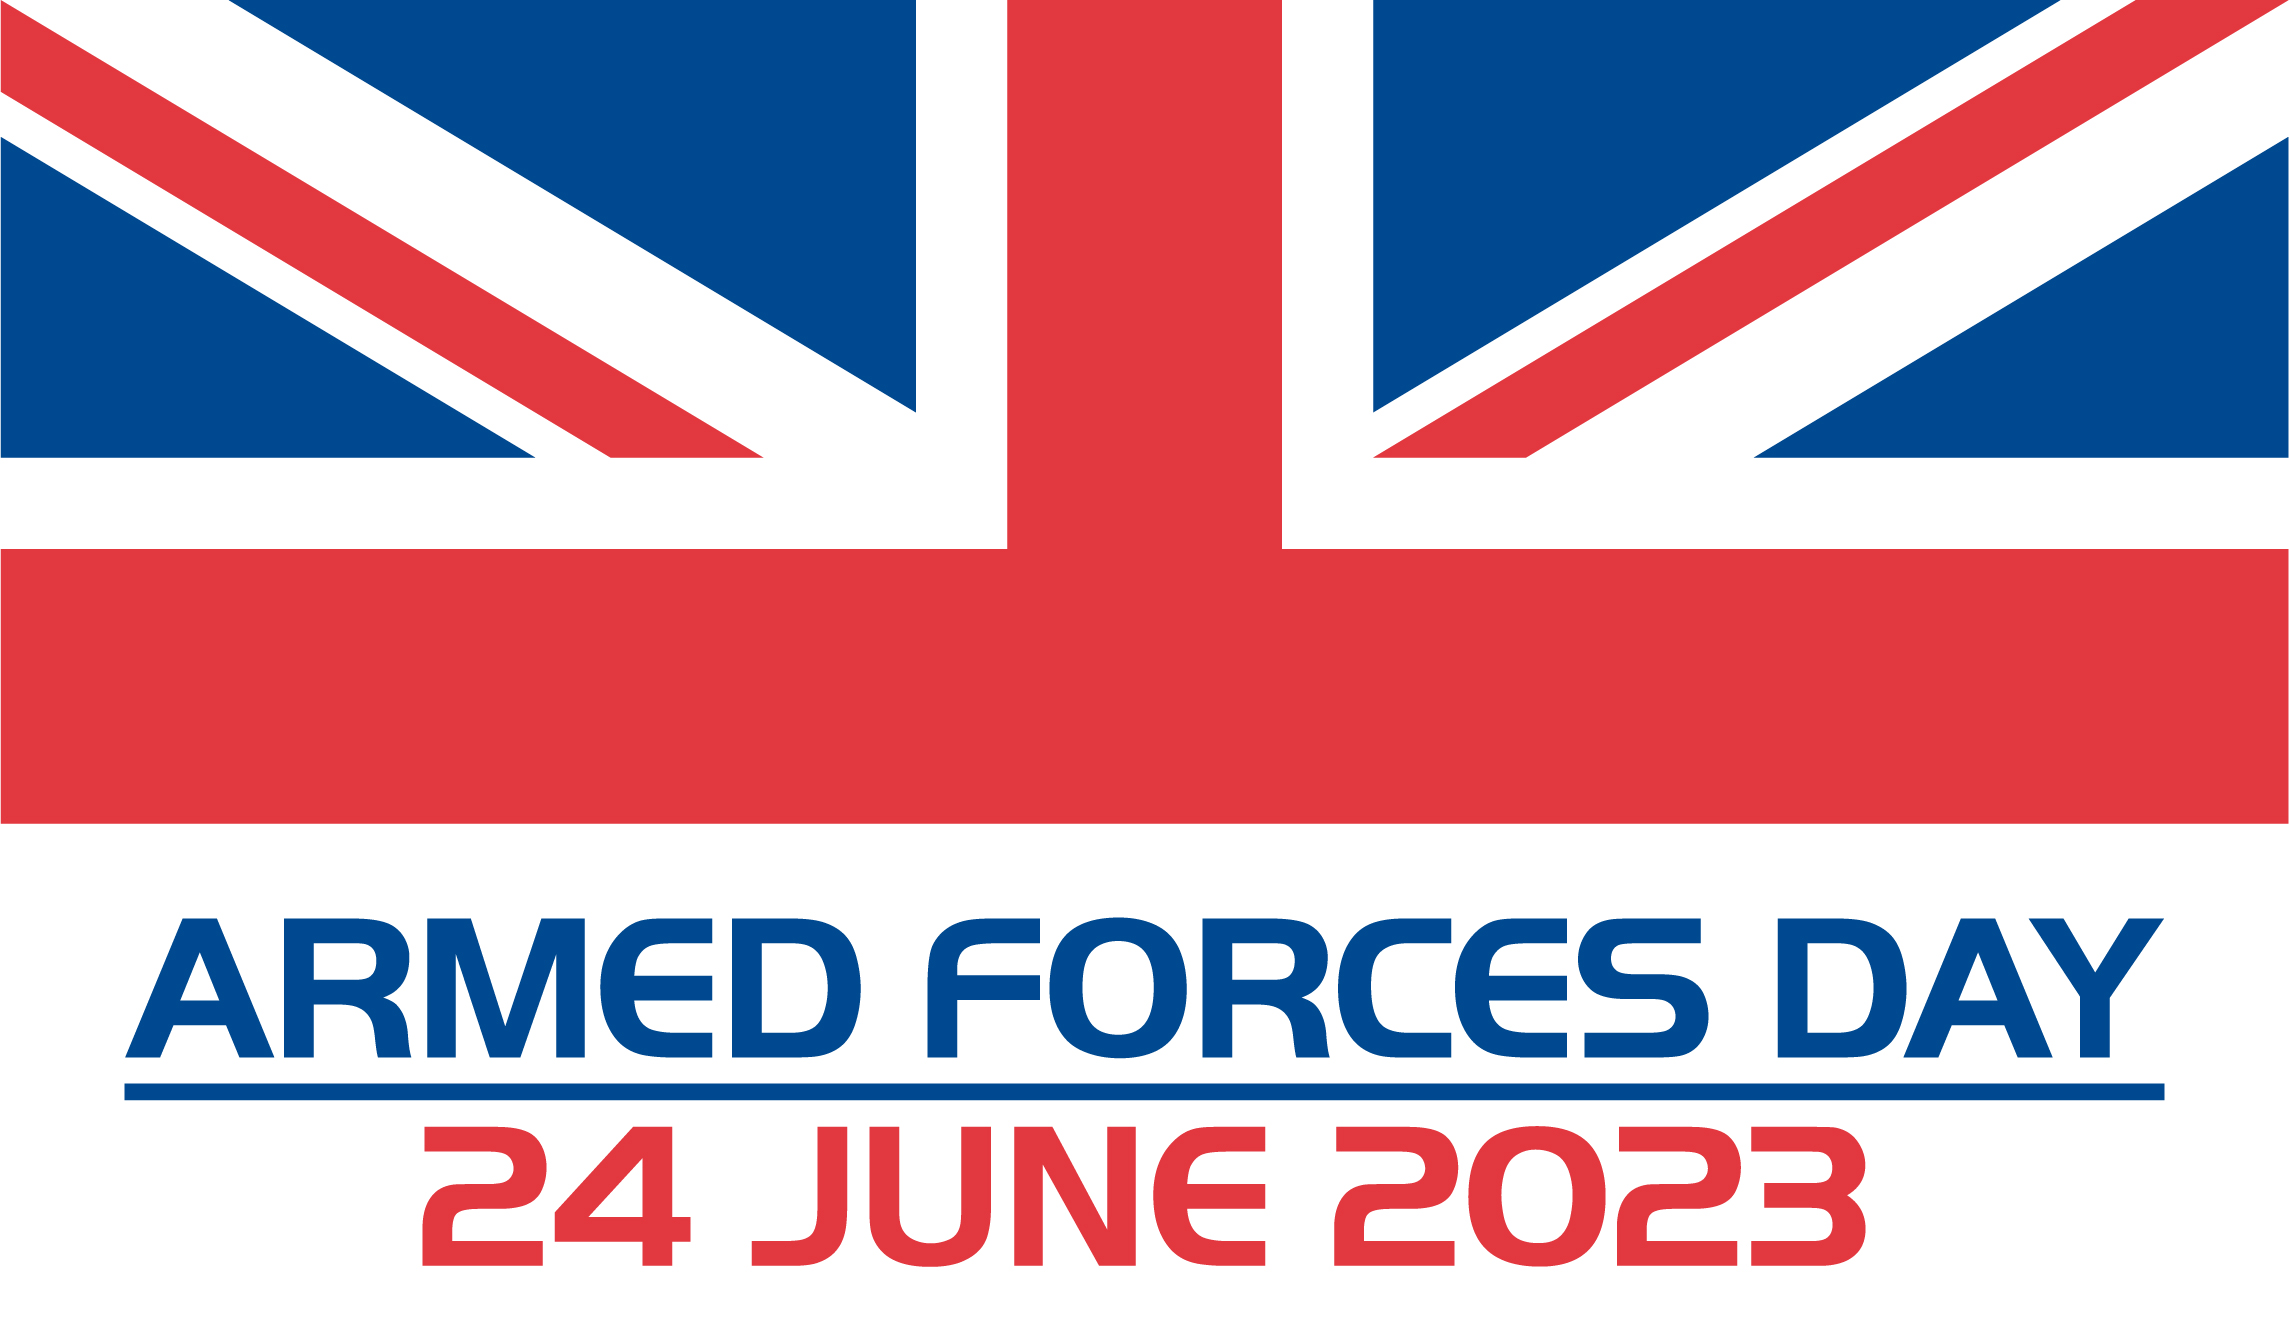 Image depicts Armed Forces Day 24 June 2023 with half of the Union Jack flag.